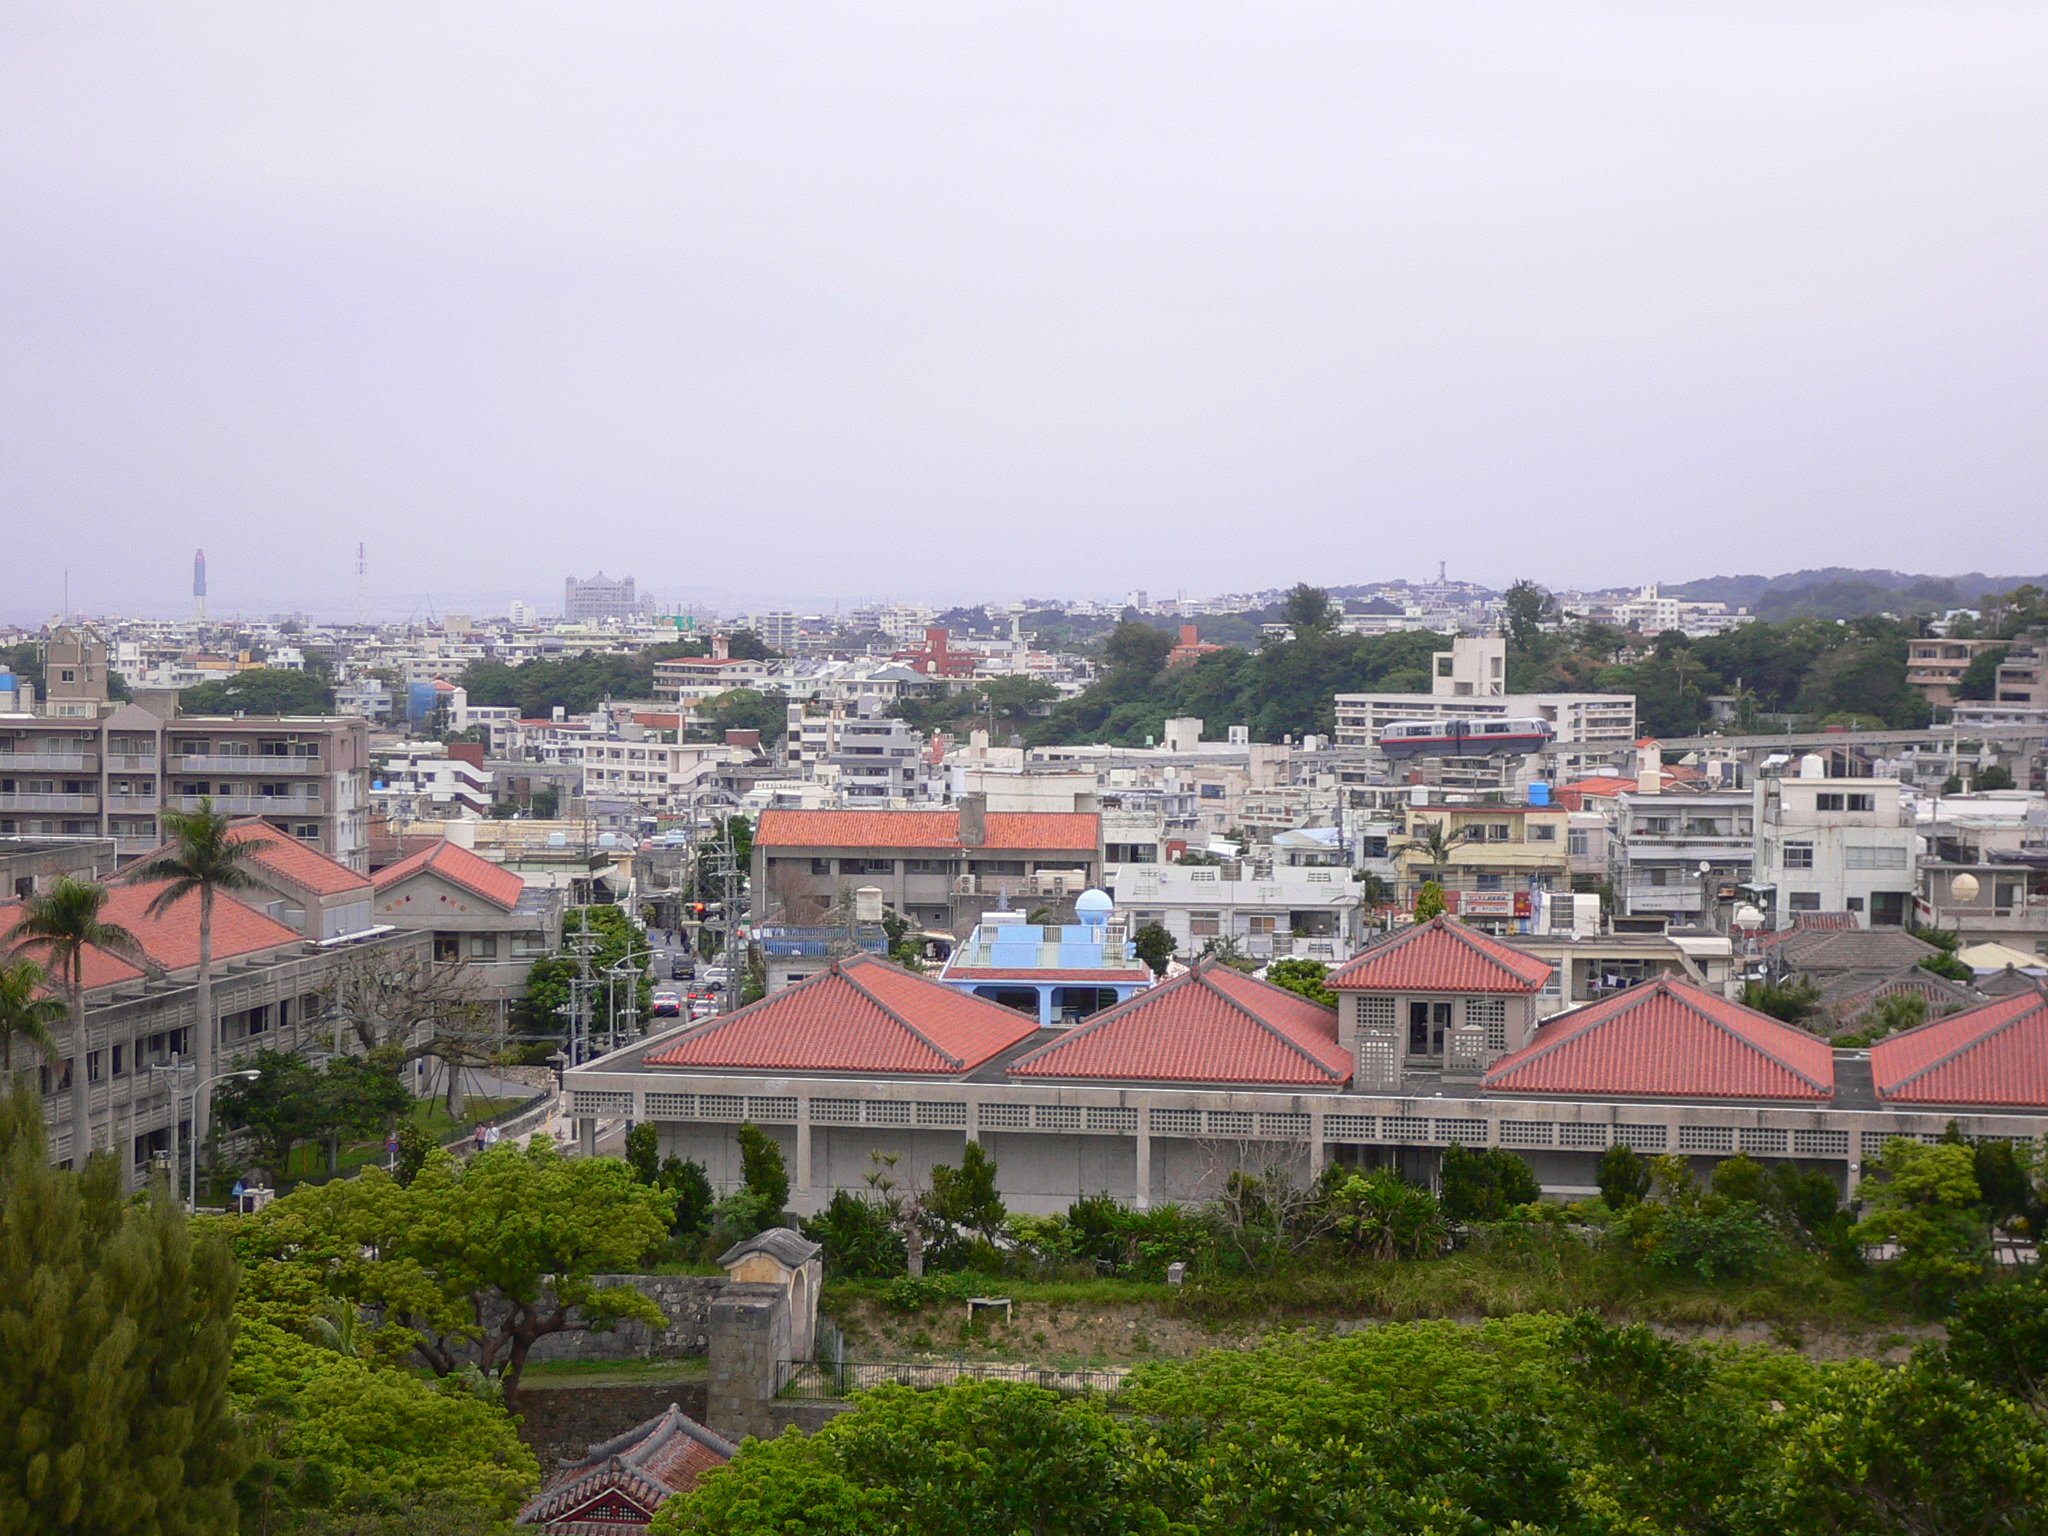 Overlooking the city from Shuri-jo Castle